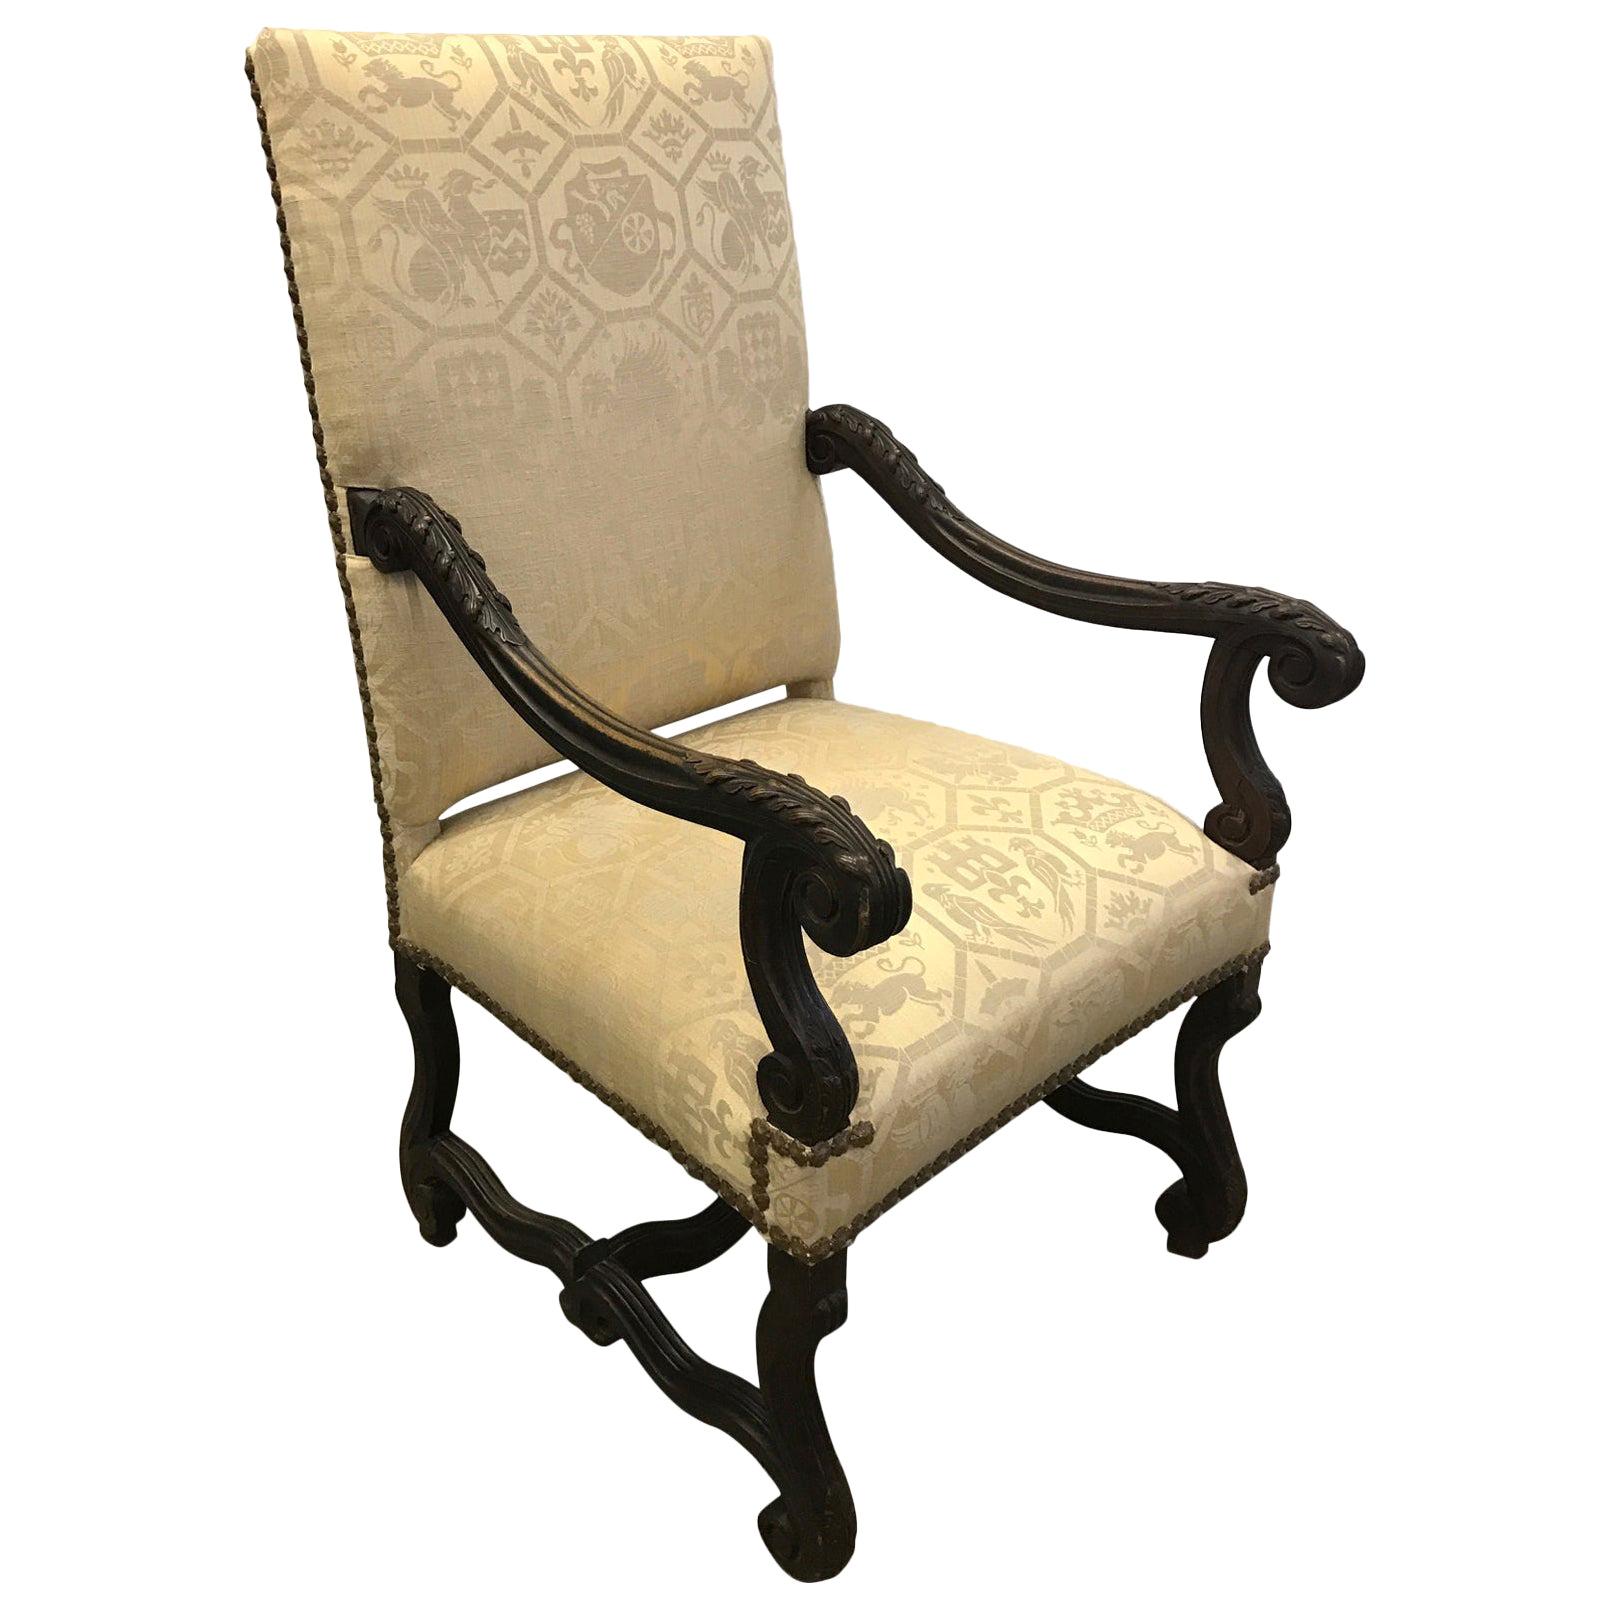 Antique English Carved Walnut Lolling Chair with Brass Trim, circa 1880